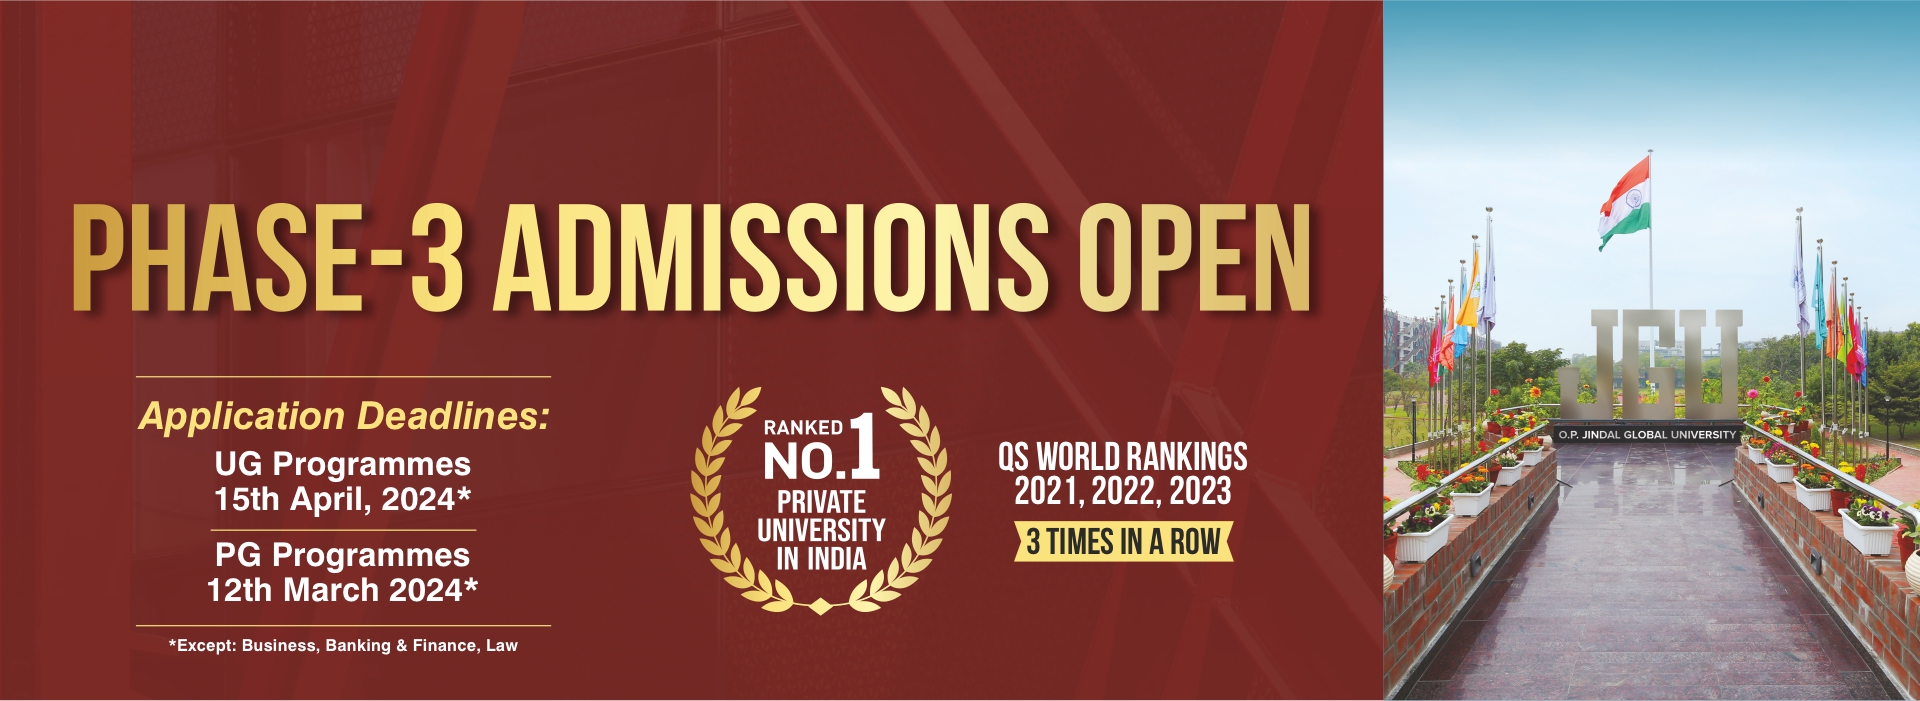 JGU Admisions Admission Open Phase 3